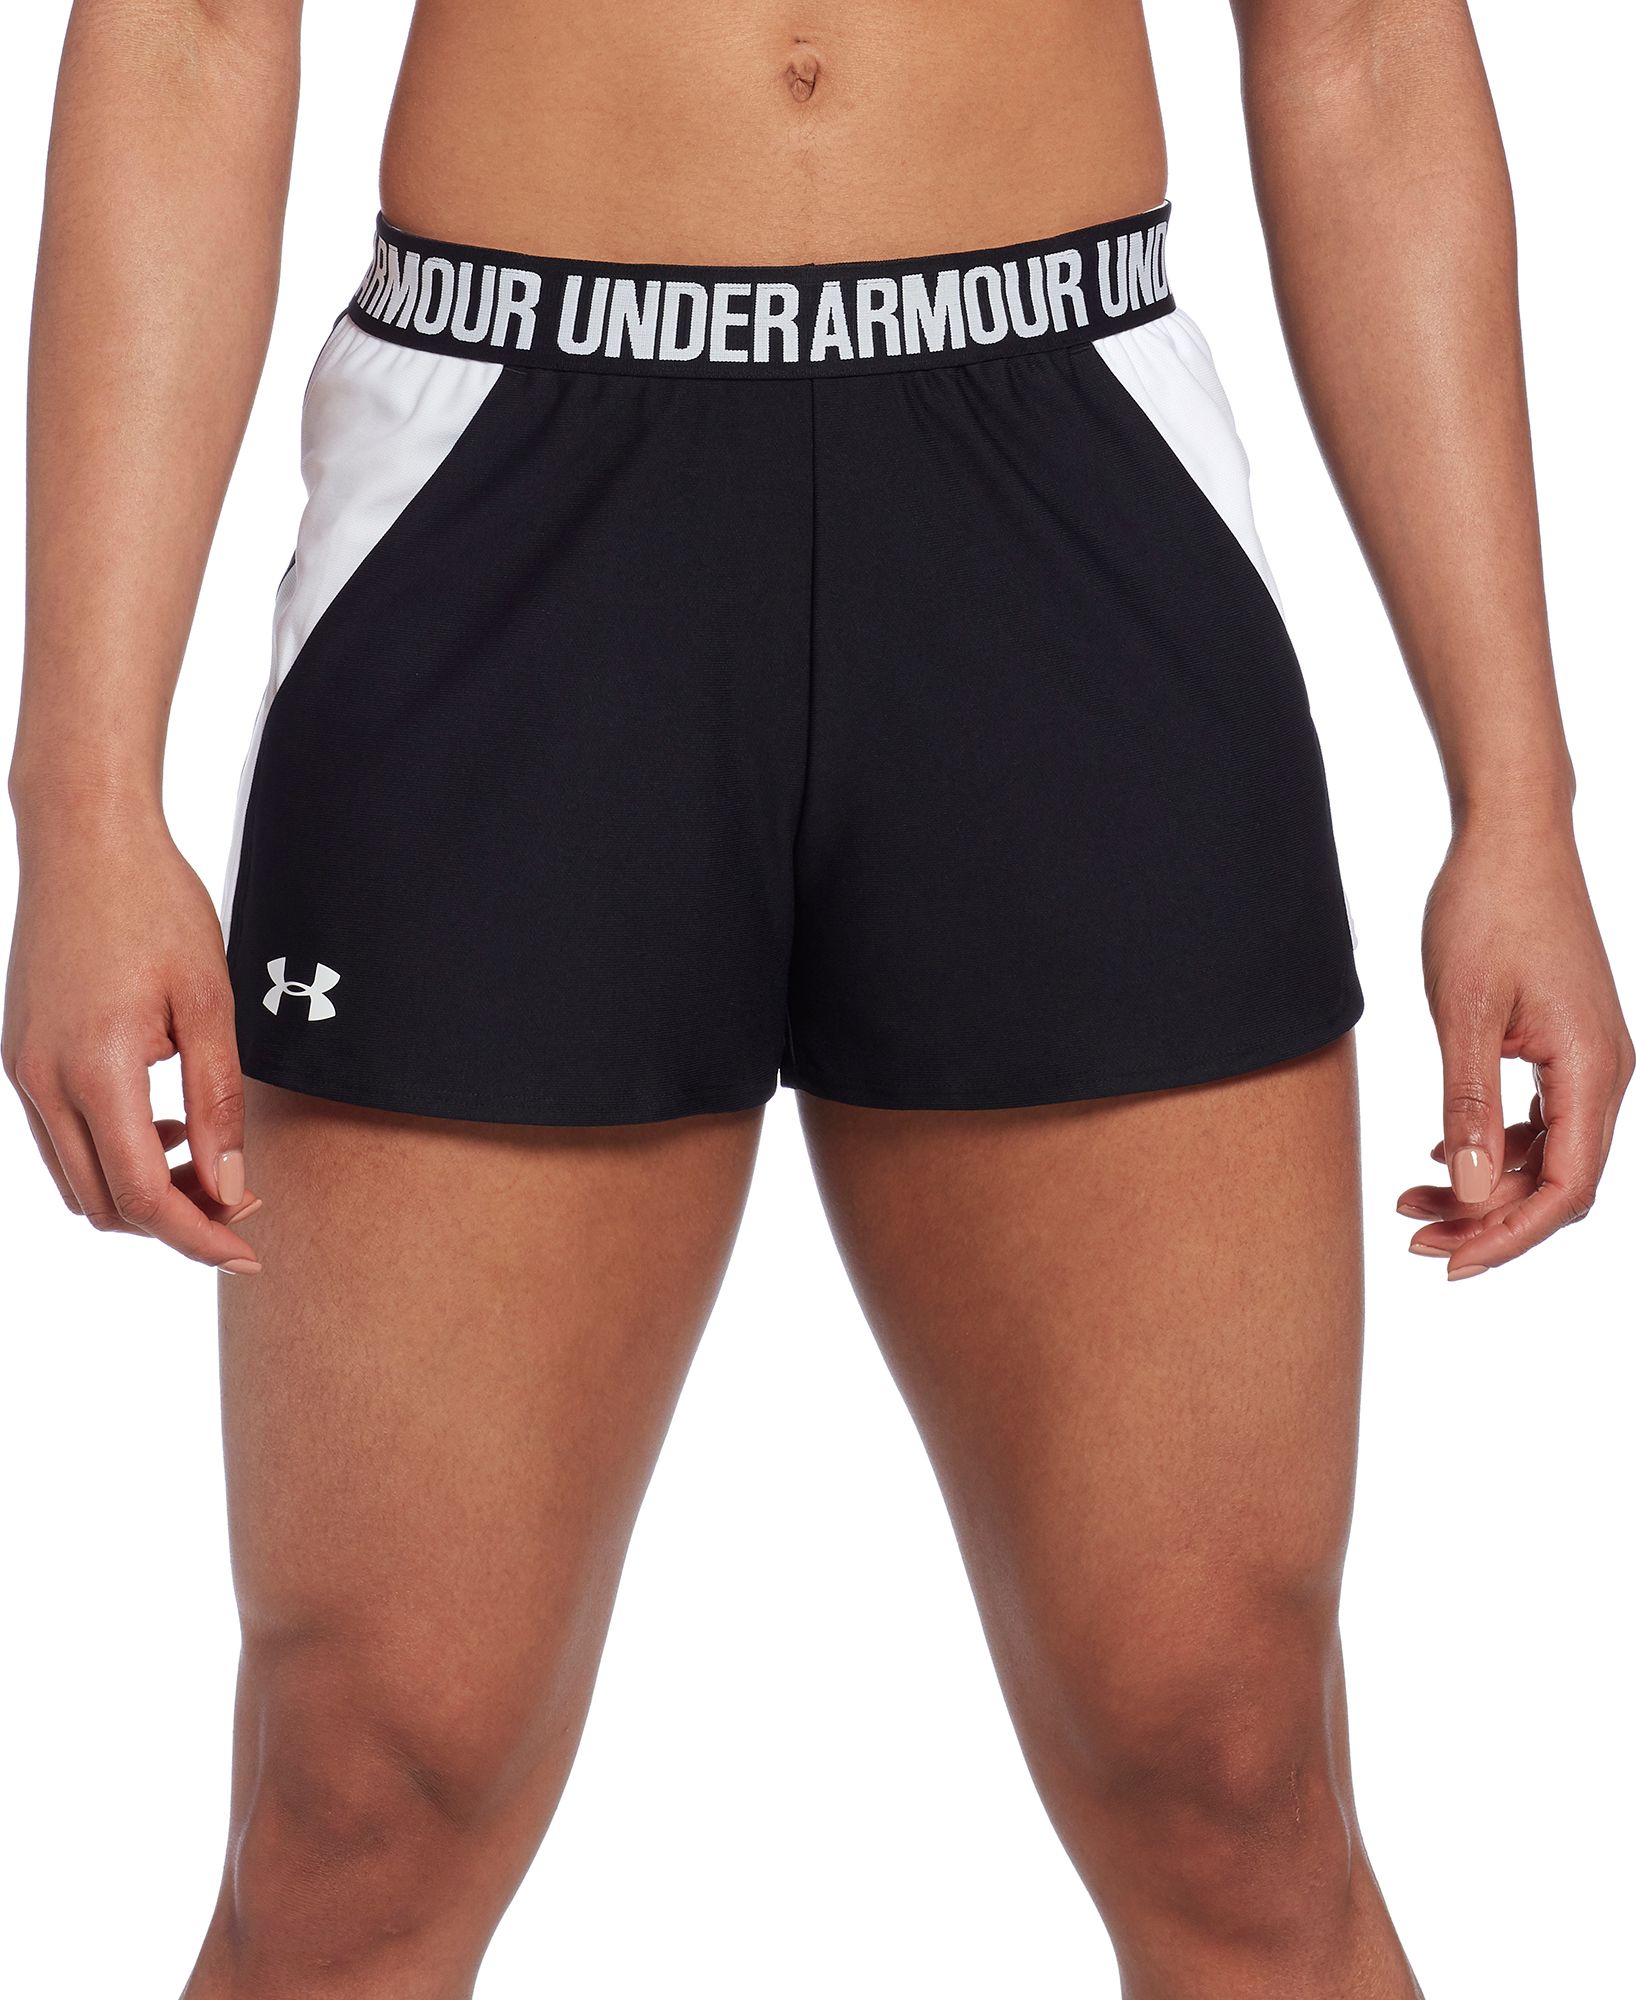 Under Armour Women's 3'' Play Up Shorts 